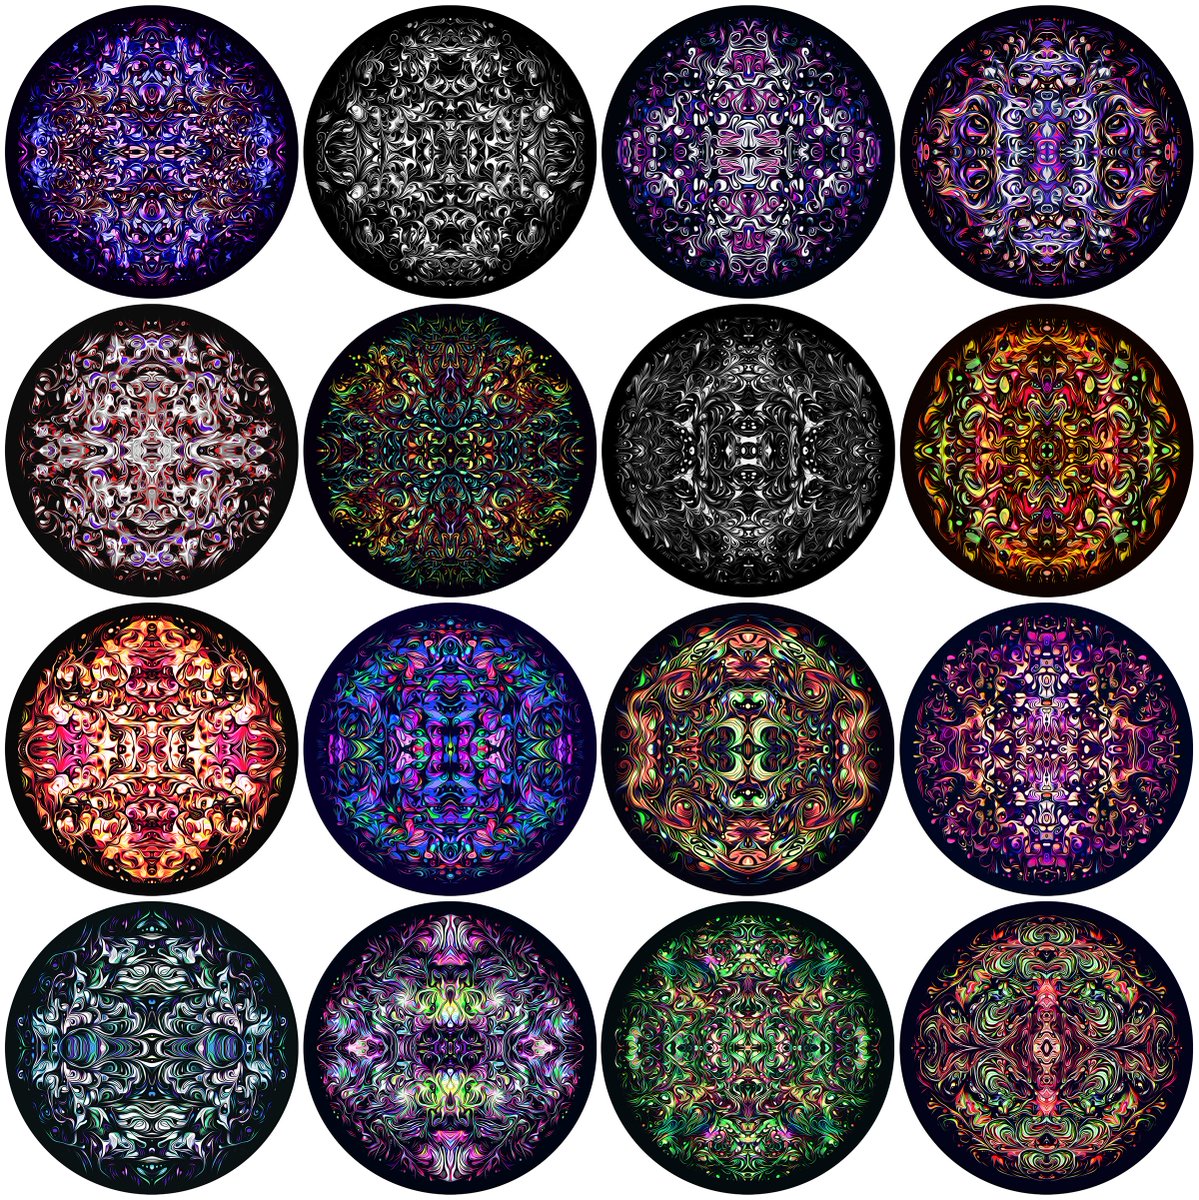 Full set of recent abstract symmetrical experiments. behance.net/gallery/198181…